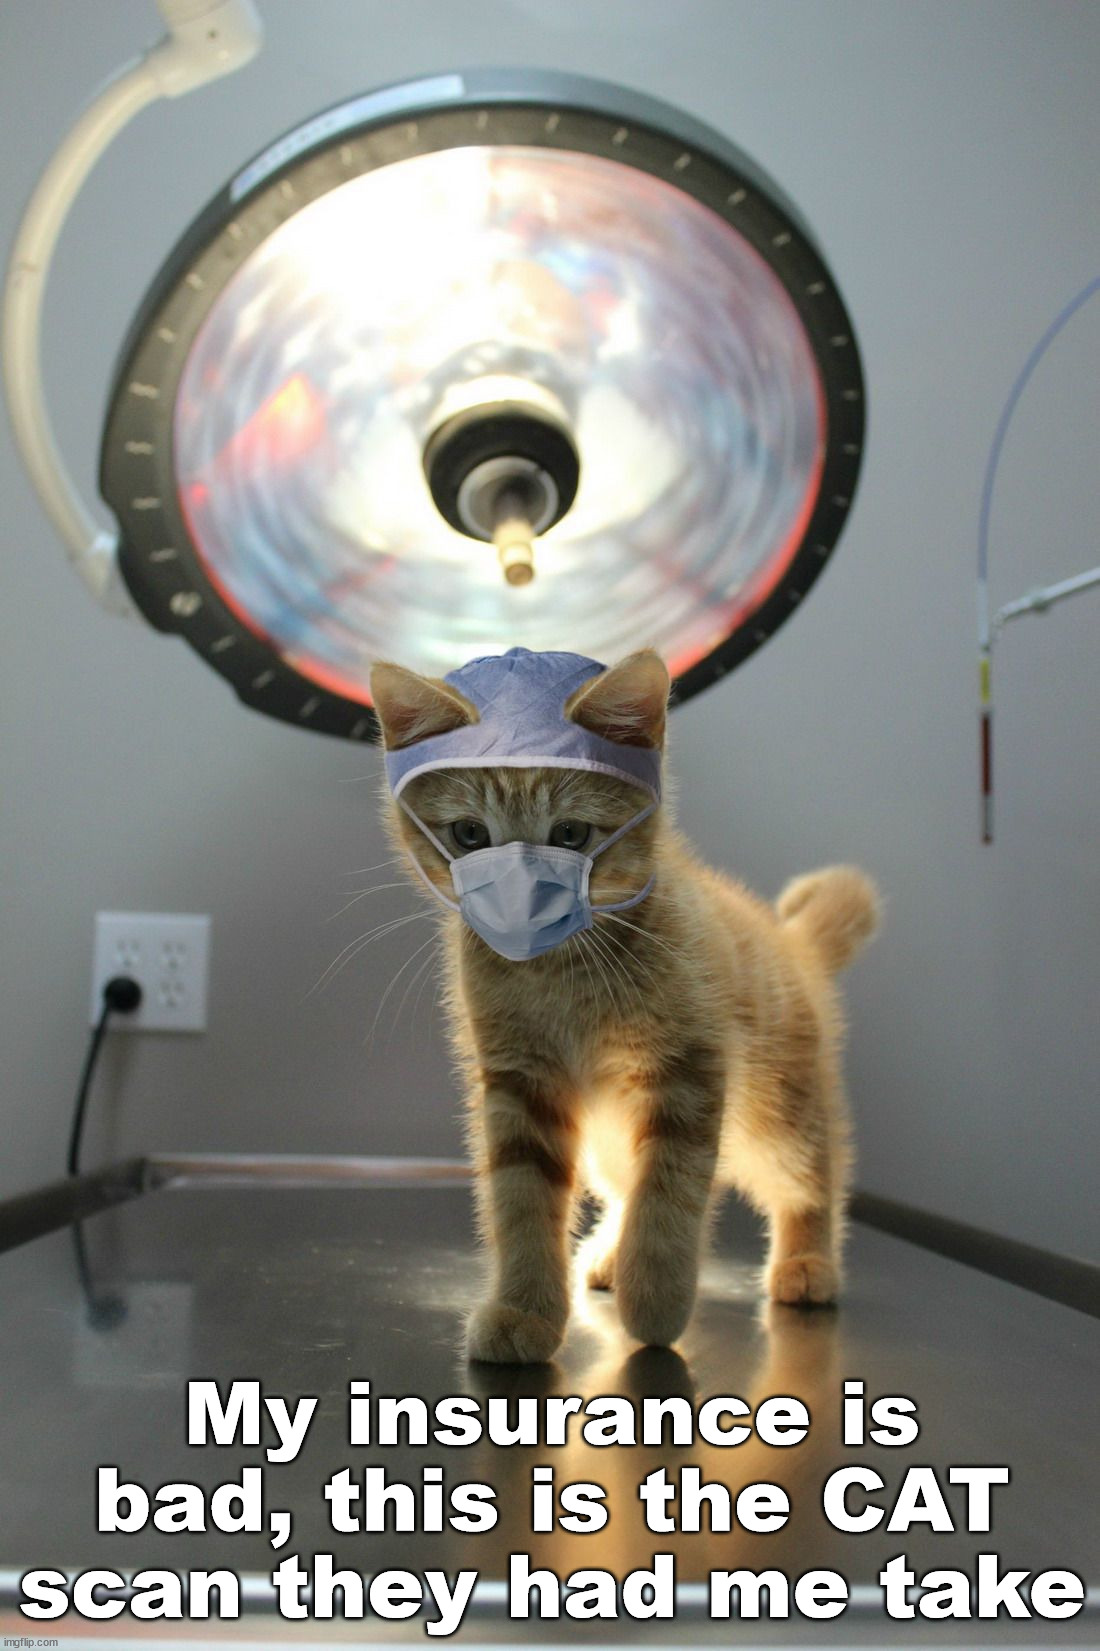 When your insurance is bad. | My insurance is bad, this is the CAT scan they had me take | image tagged in cat,scan,doctor | made w/ Imgflip meme maker